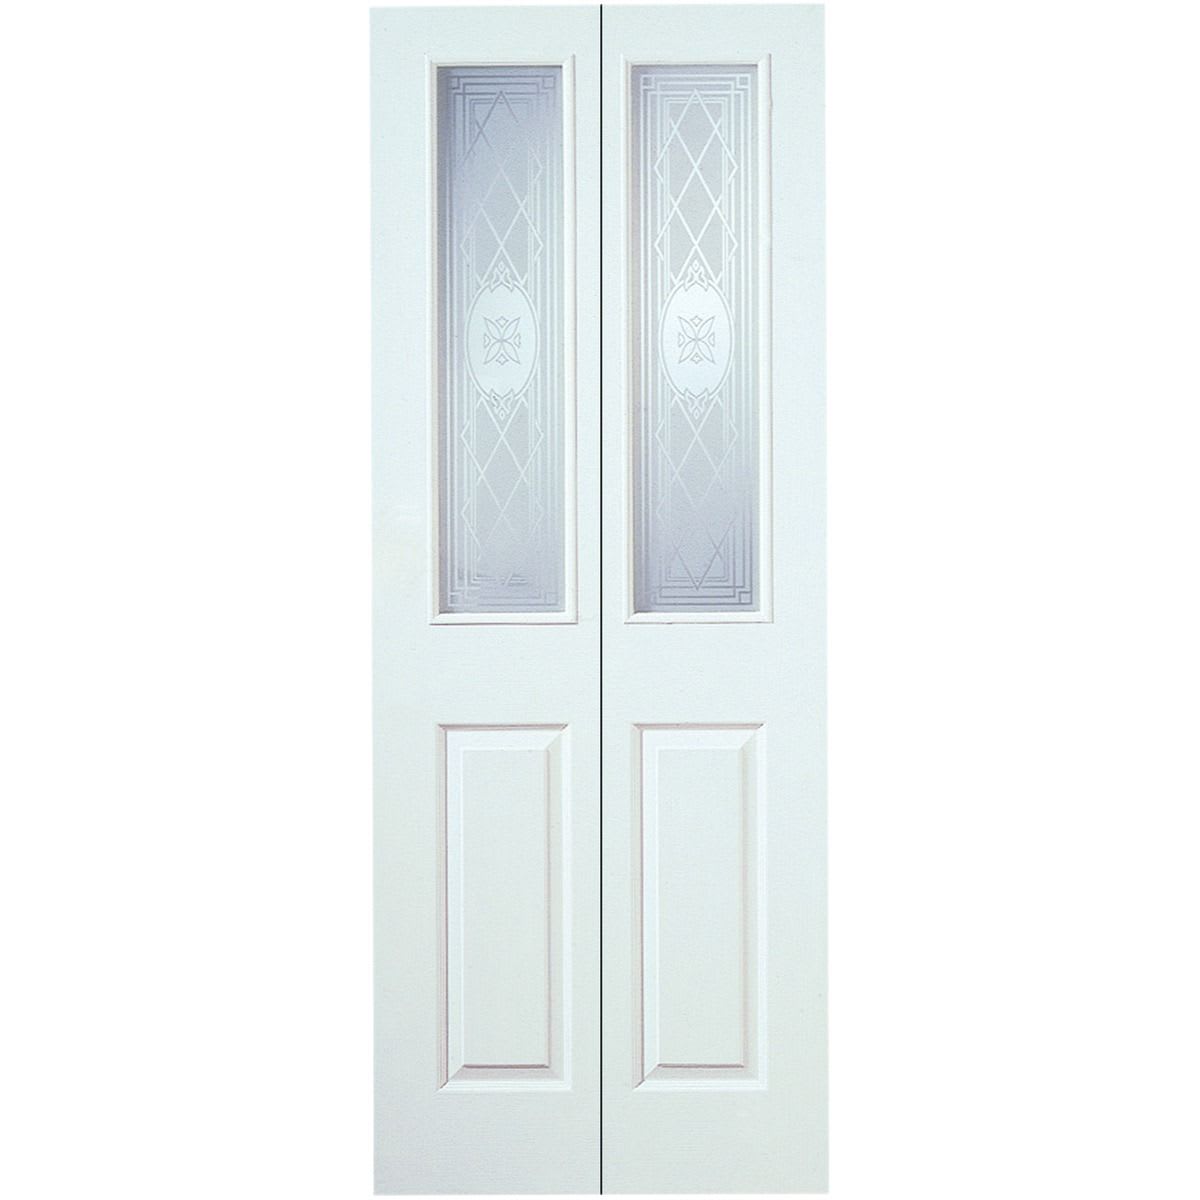 Wickes Chester White Grained Glazed Moulded 4 Panel